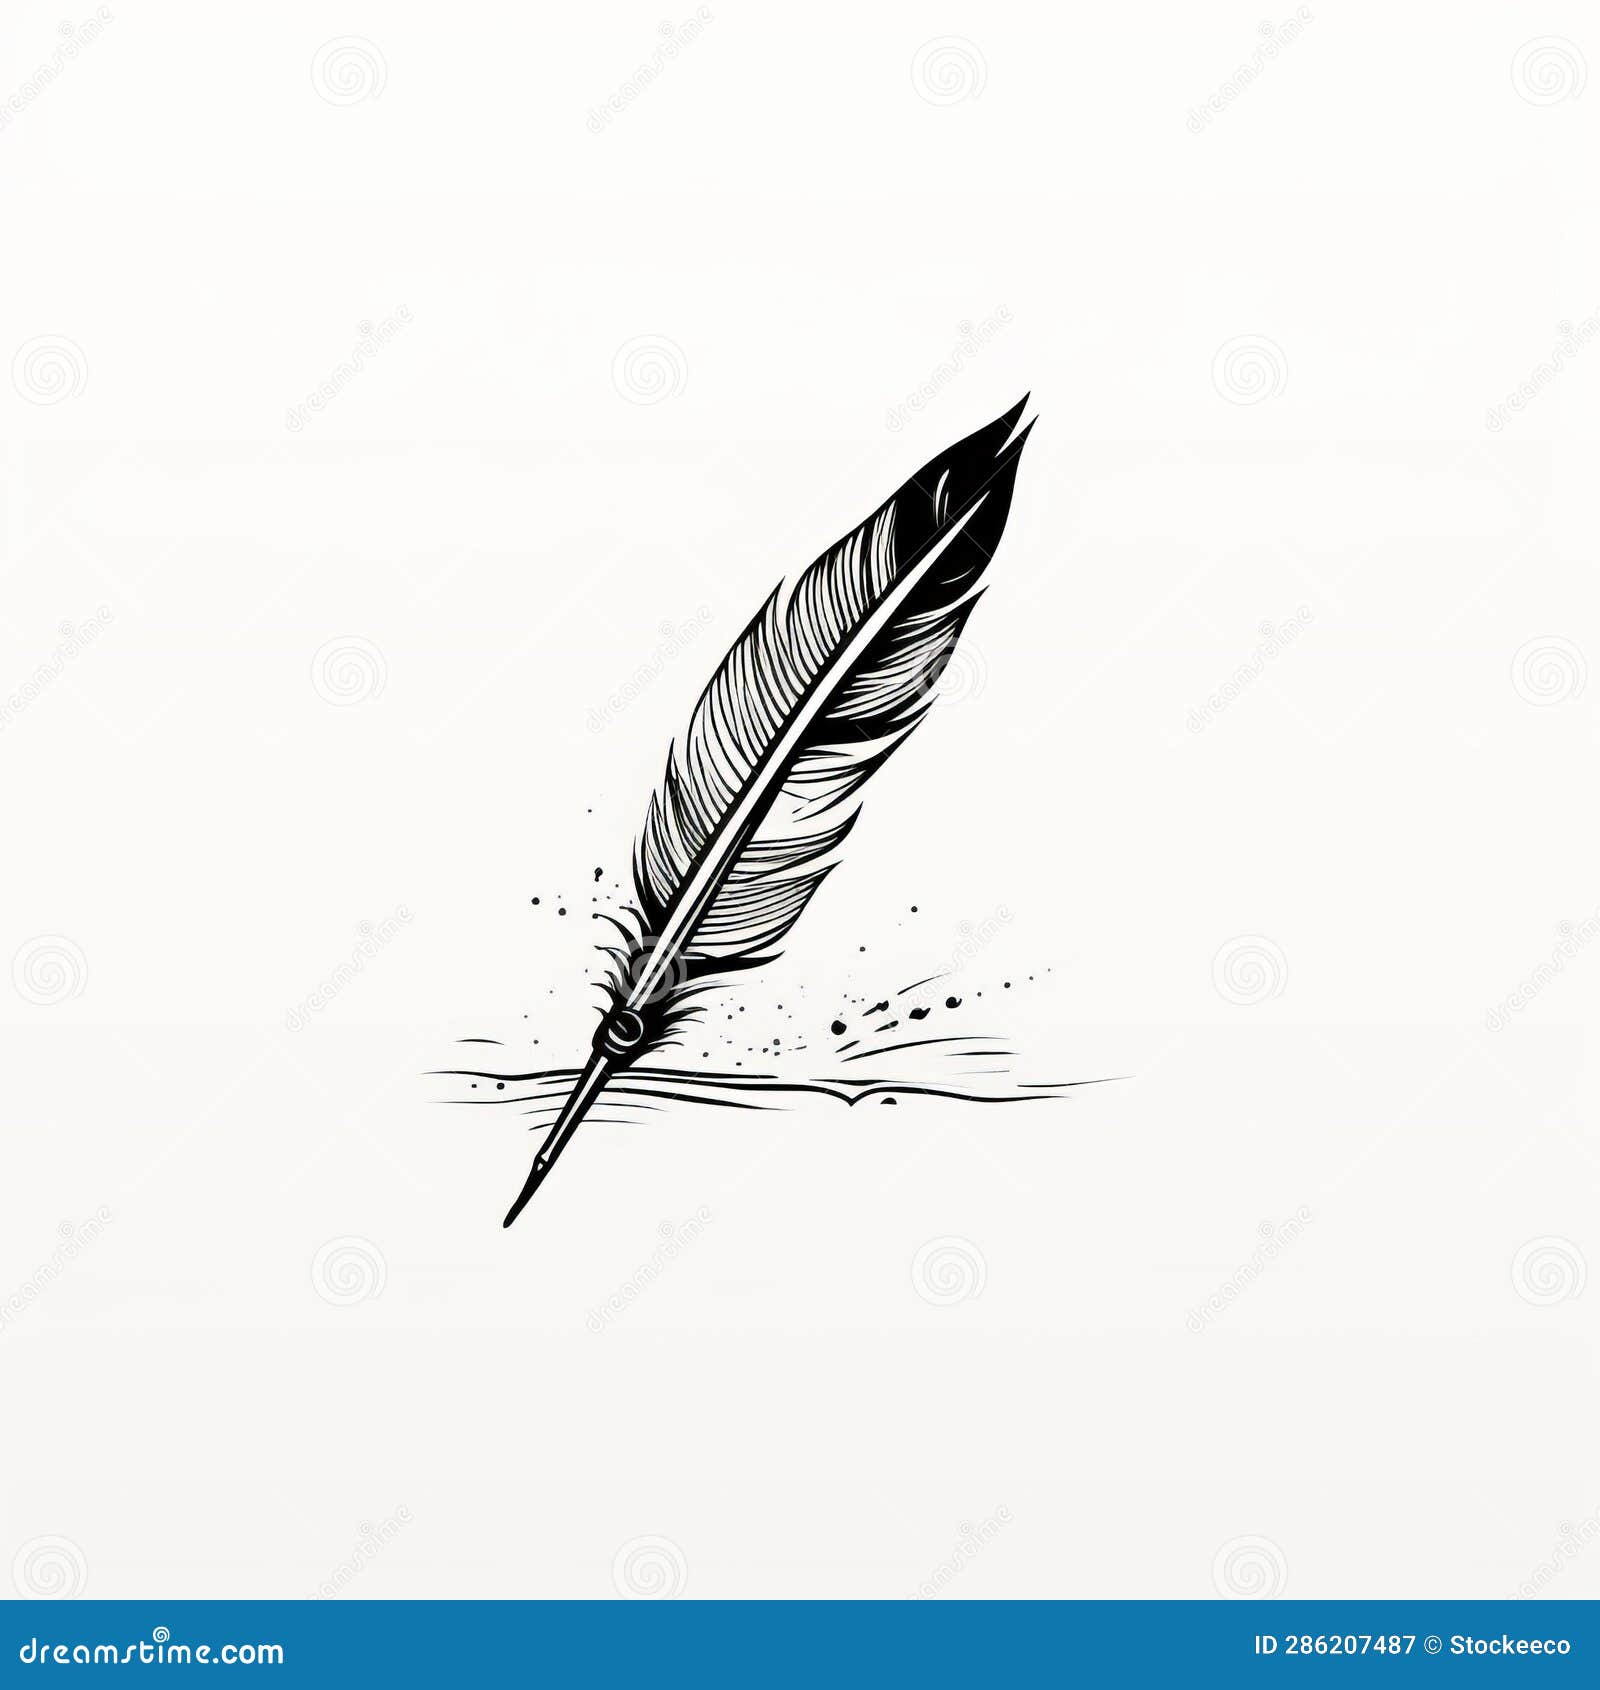 feather quill: handdrawn  in gabriel pacheco style